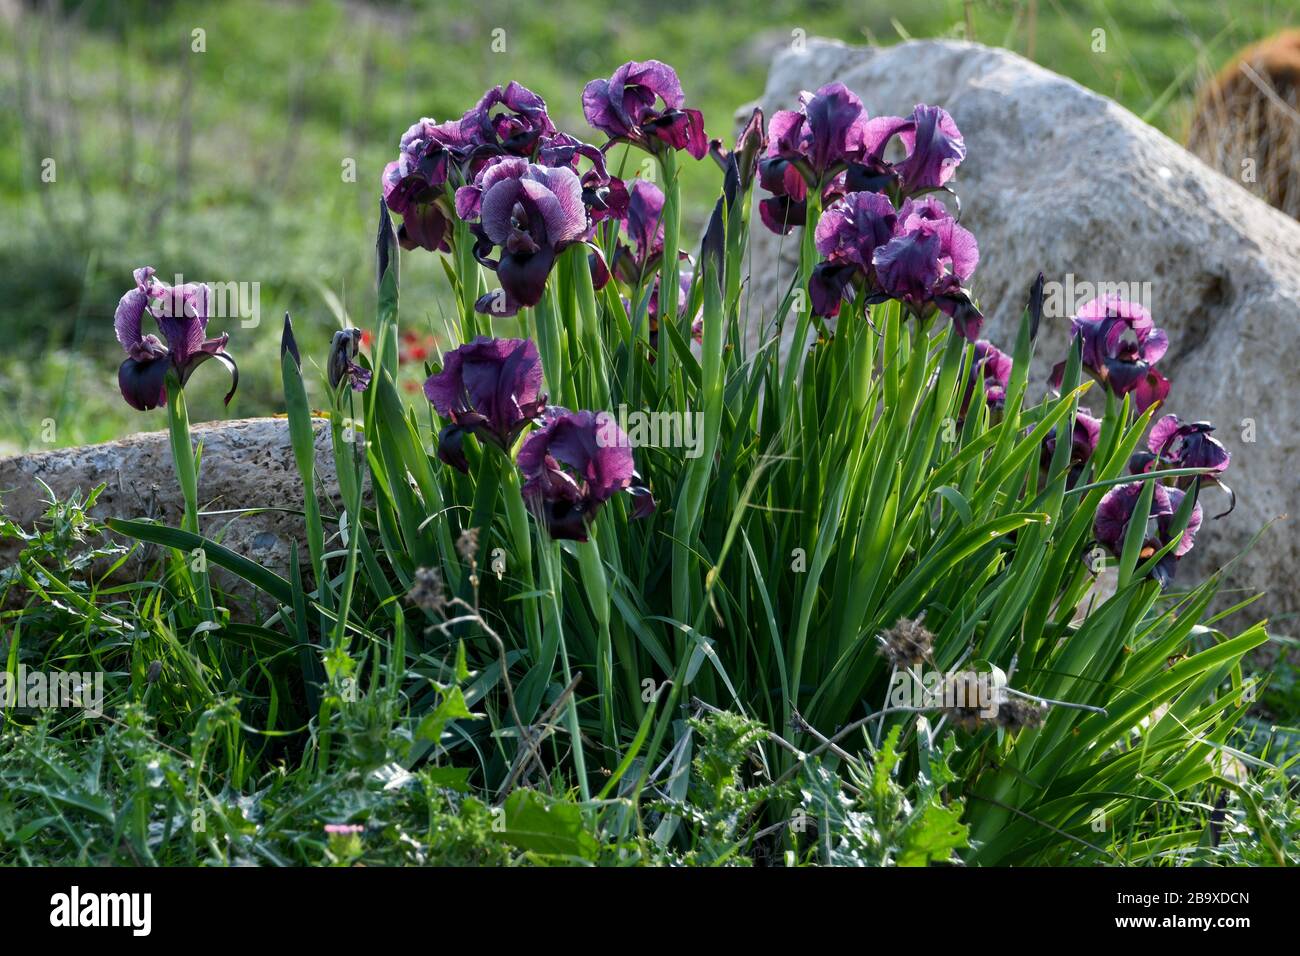 Iris atrofusca (Judean iris or Gilead iris) is a species in the genus Iris, where it is placed in the subgenus Iris and the section Oncocyclus. It is Stock Photo